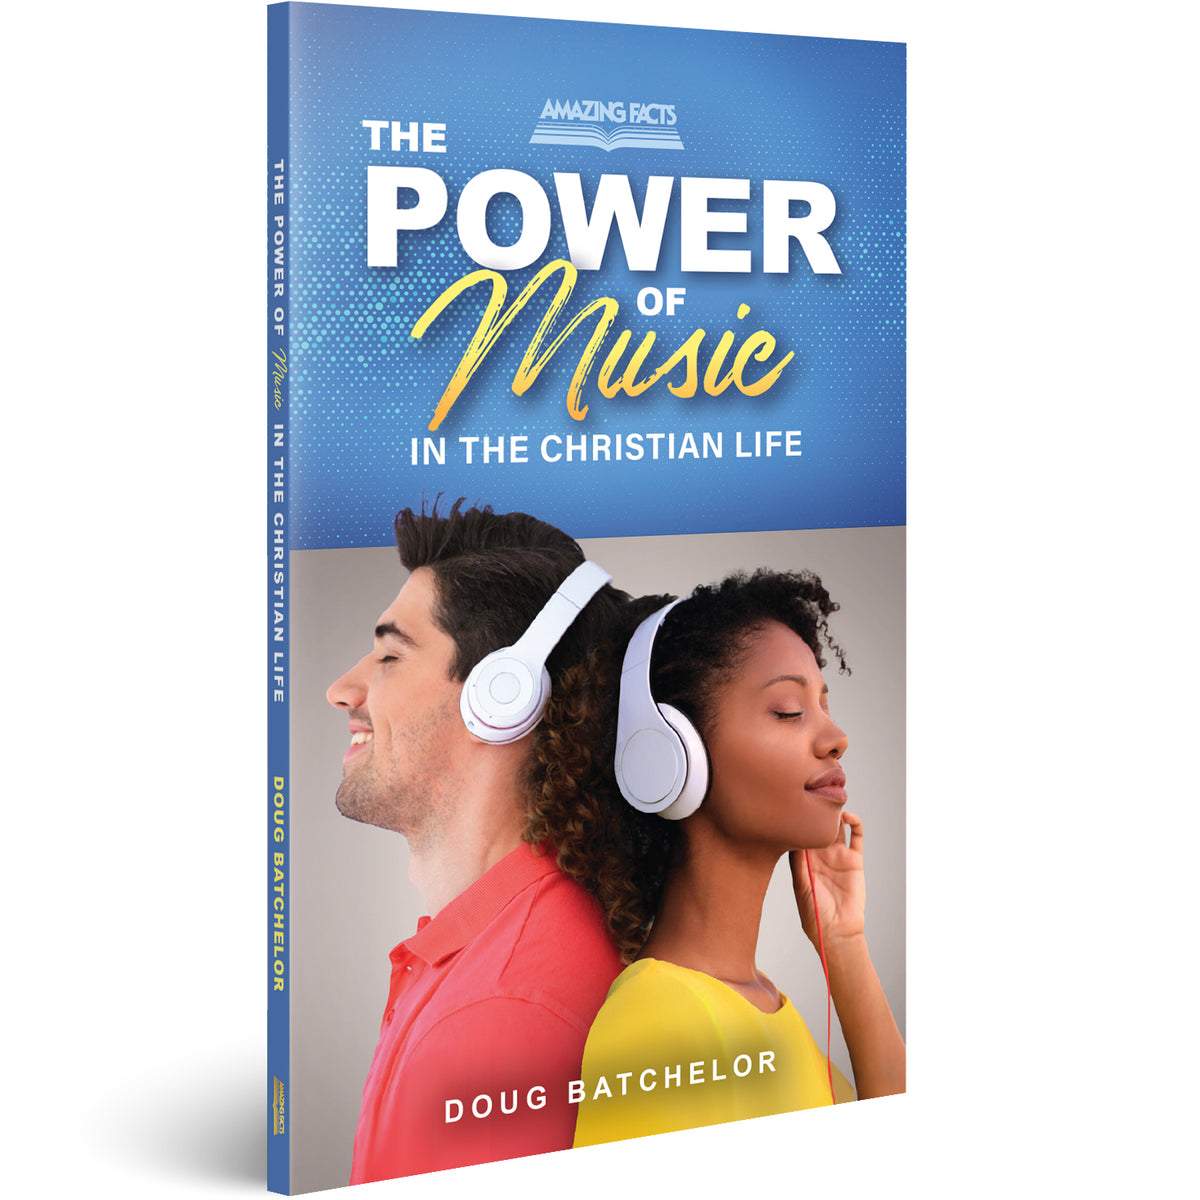 The Power of Music in the Christian Life by Doug Batchelor